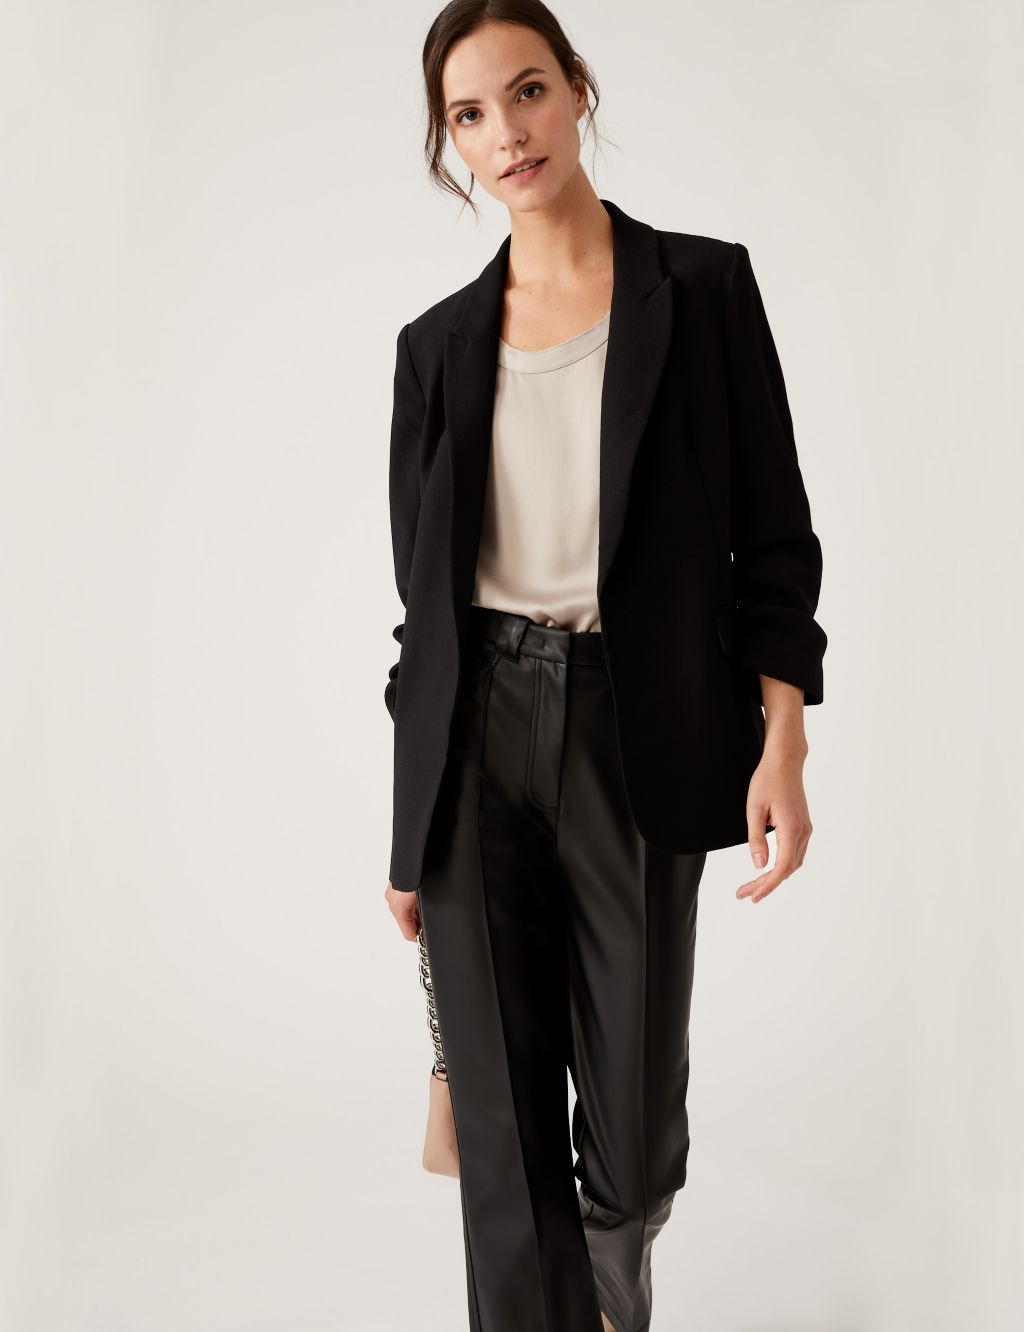 Relaxed Ruched Sleeve Blazer image 2